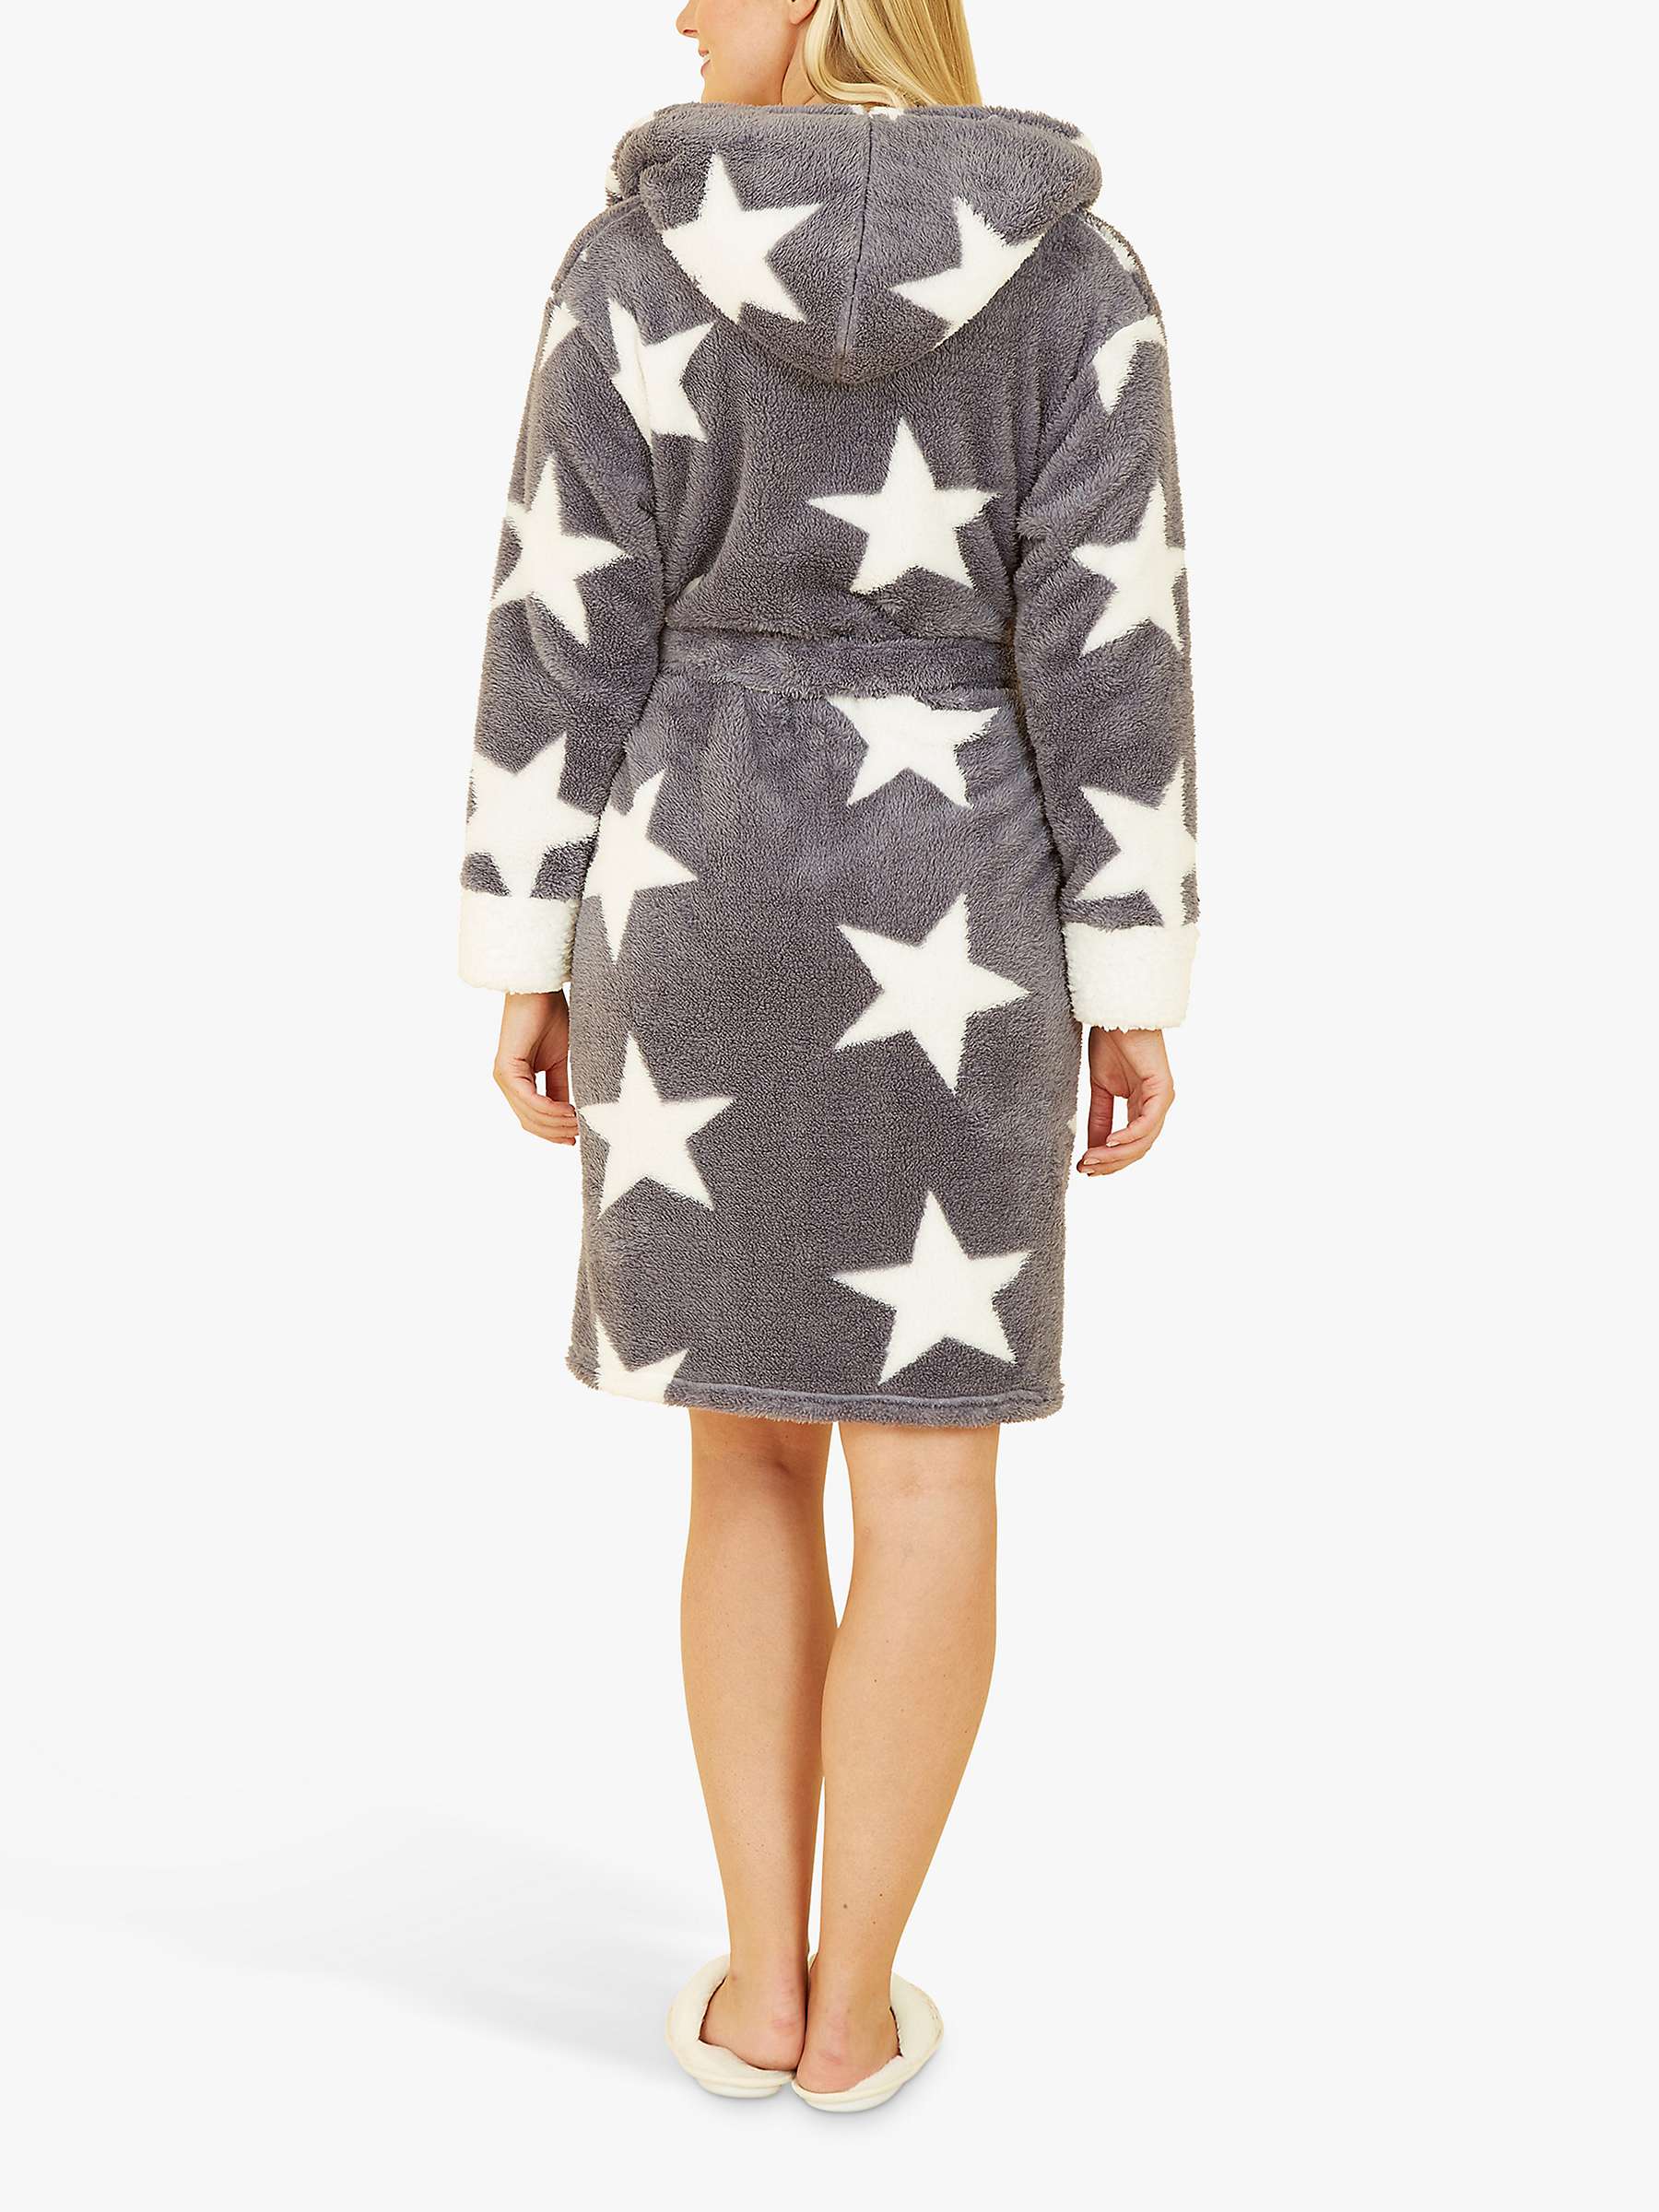 Buy Yumi Super Soft Star Print Dressing Gown Online at johnlewis.com